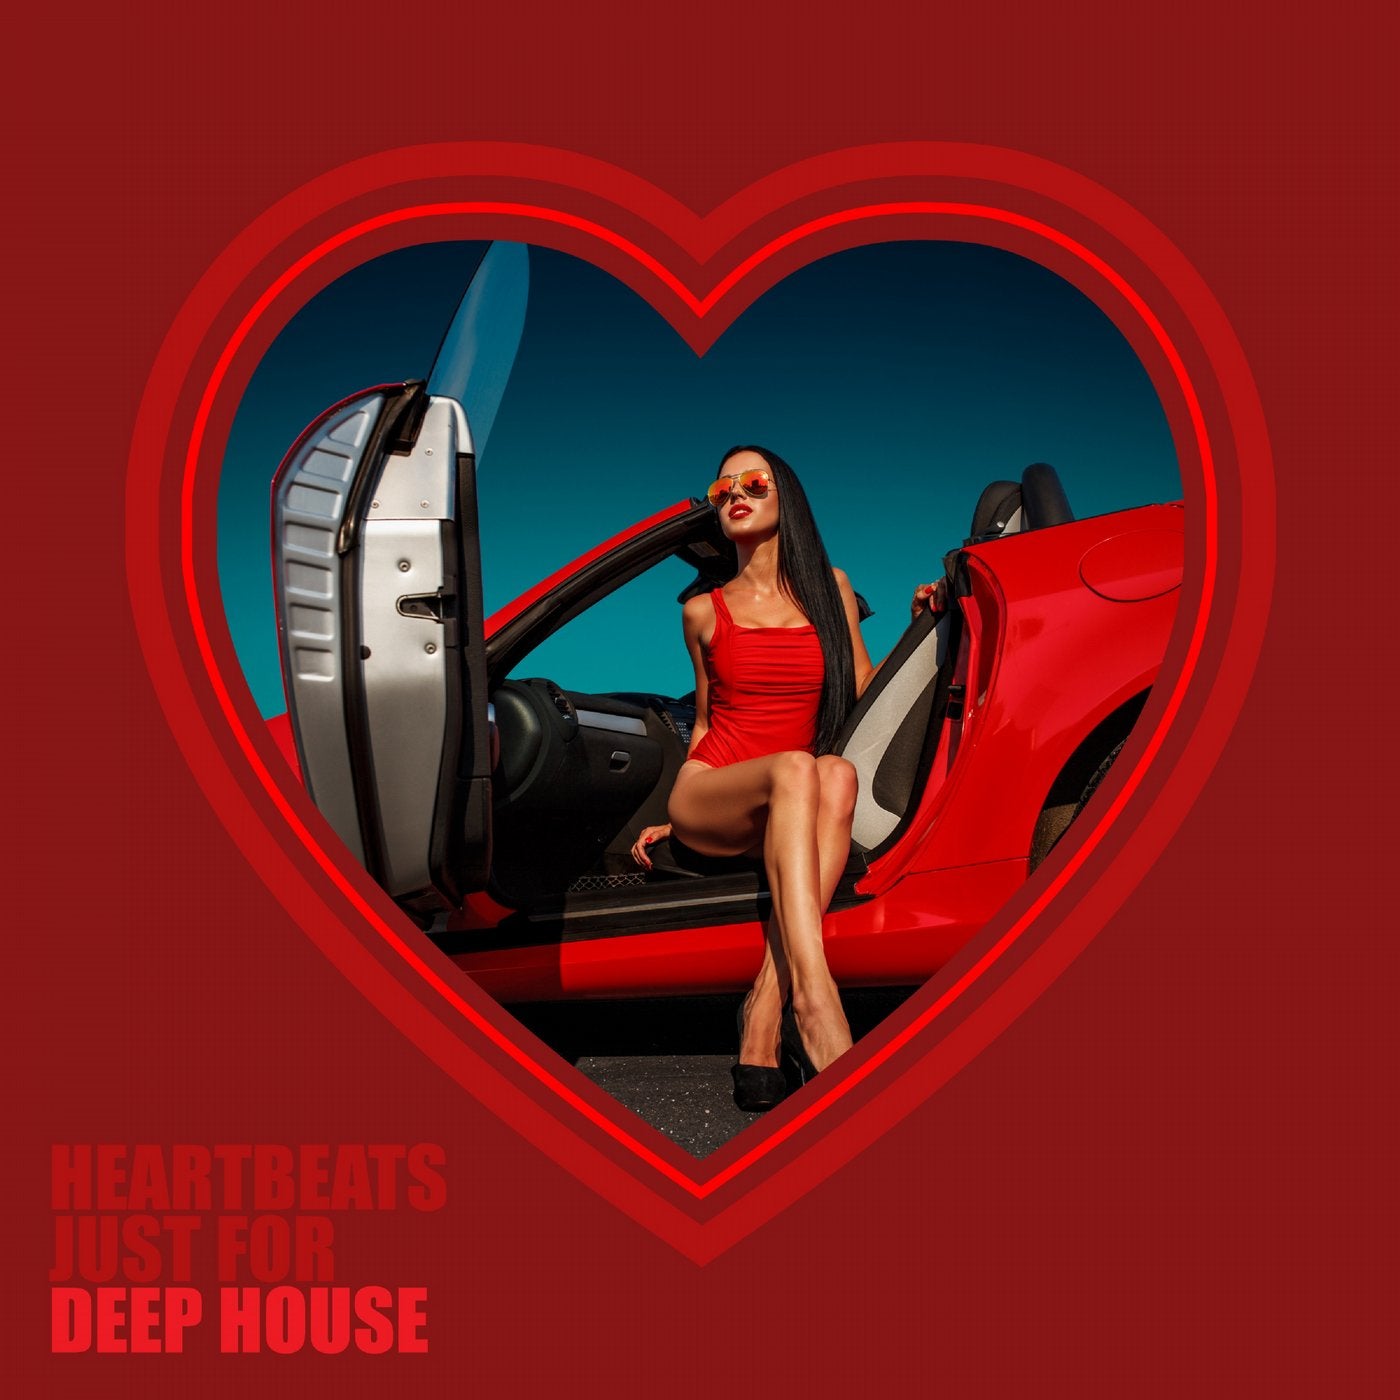 Heartbeats Just for Deep House